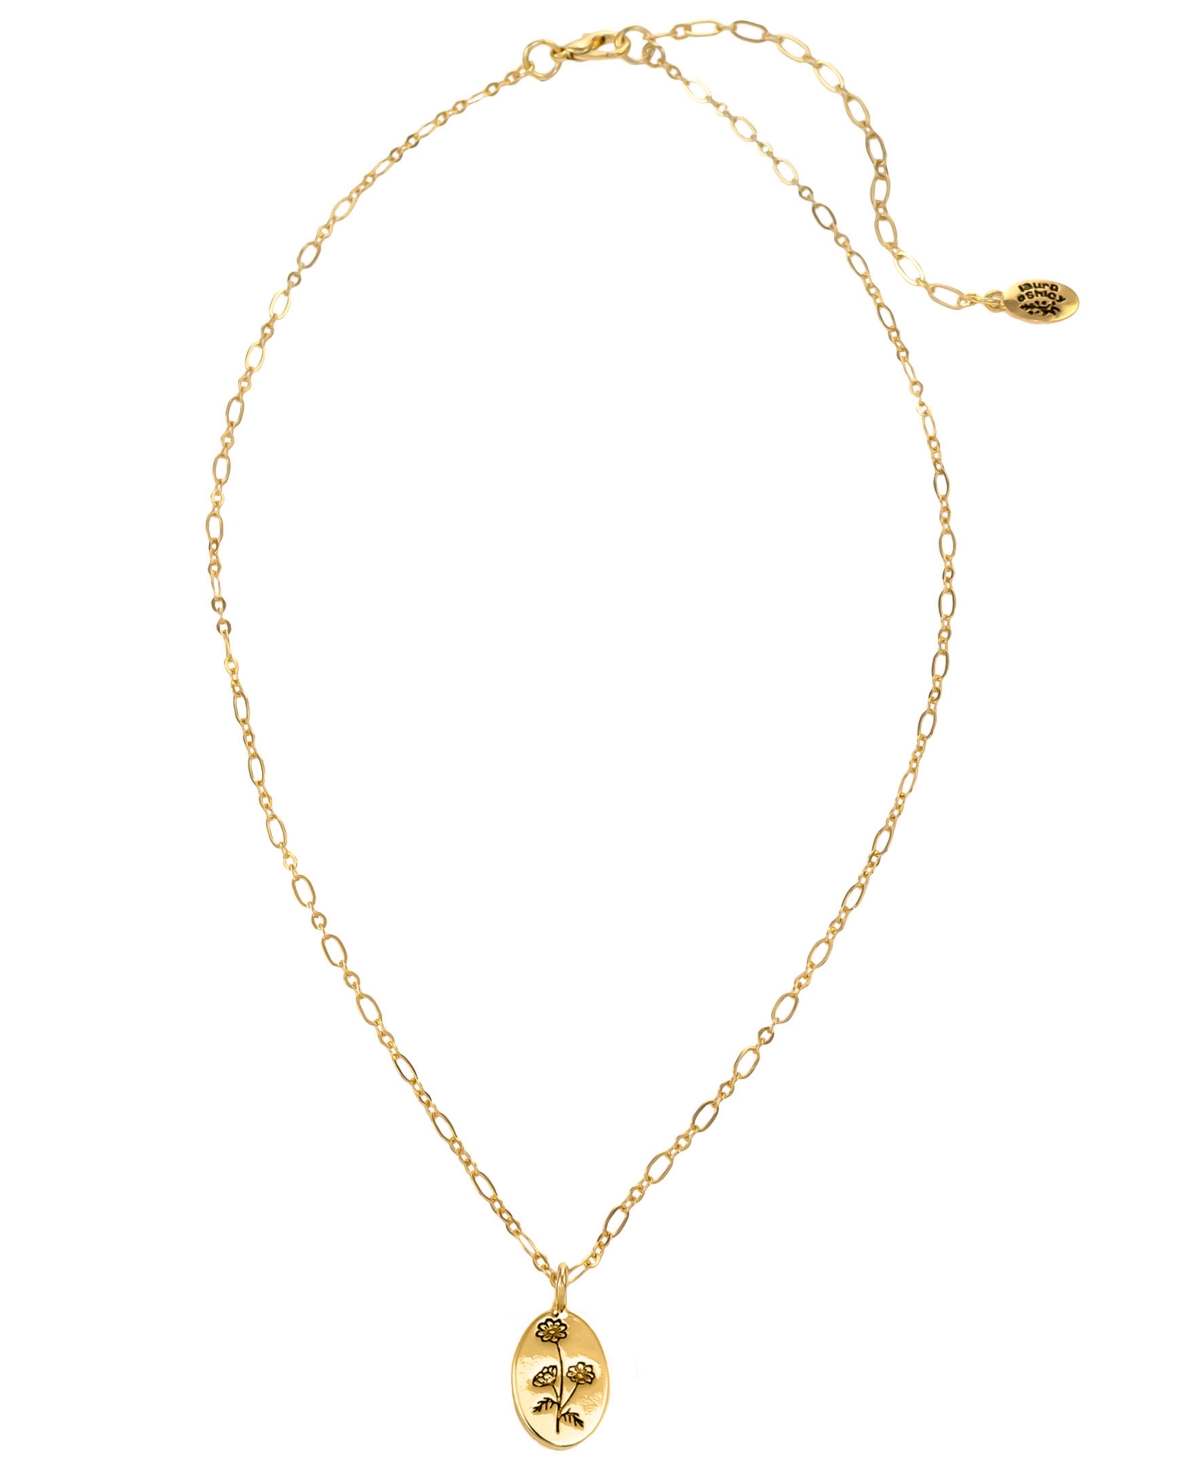 Laura Ashley Cosmos Friendship Pendant Necklace In Gold